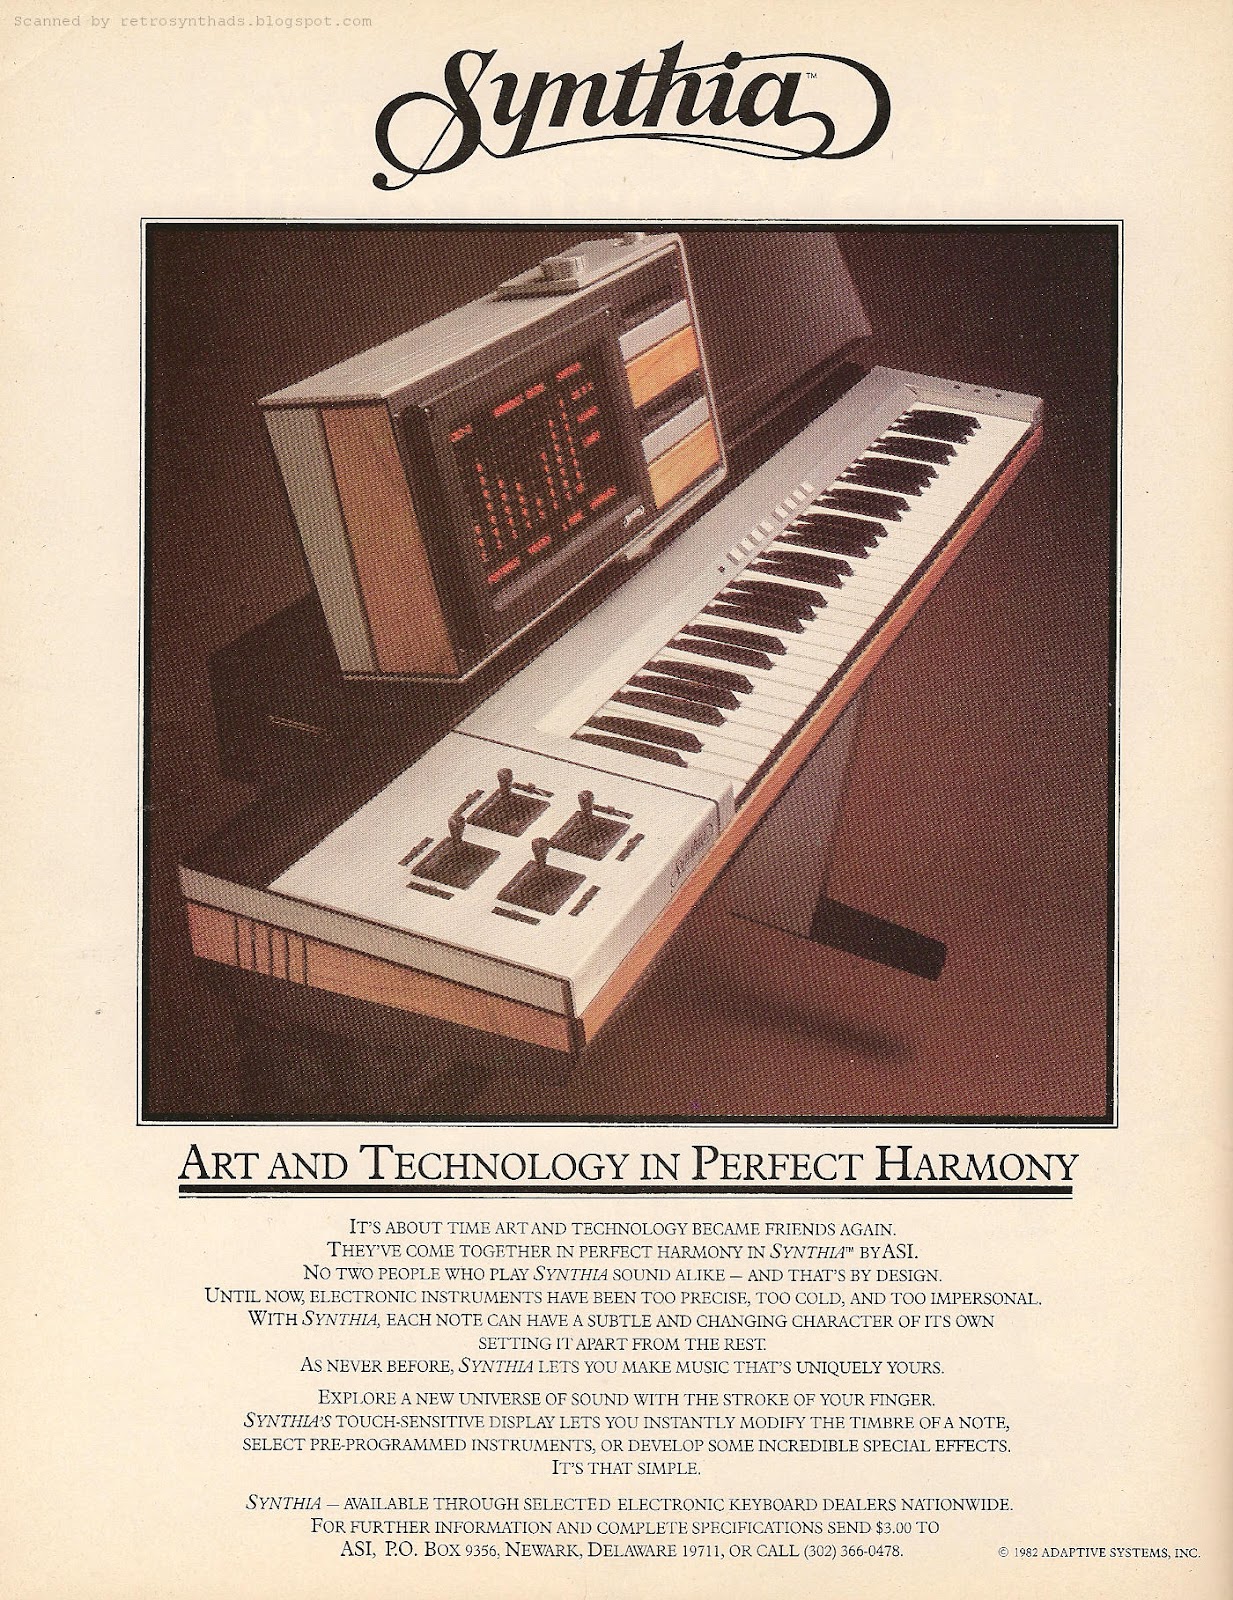 Retro Synth Ads: Adaptive Systems, Inc. Synthia synthesizer "Art and